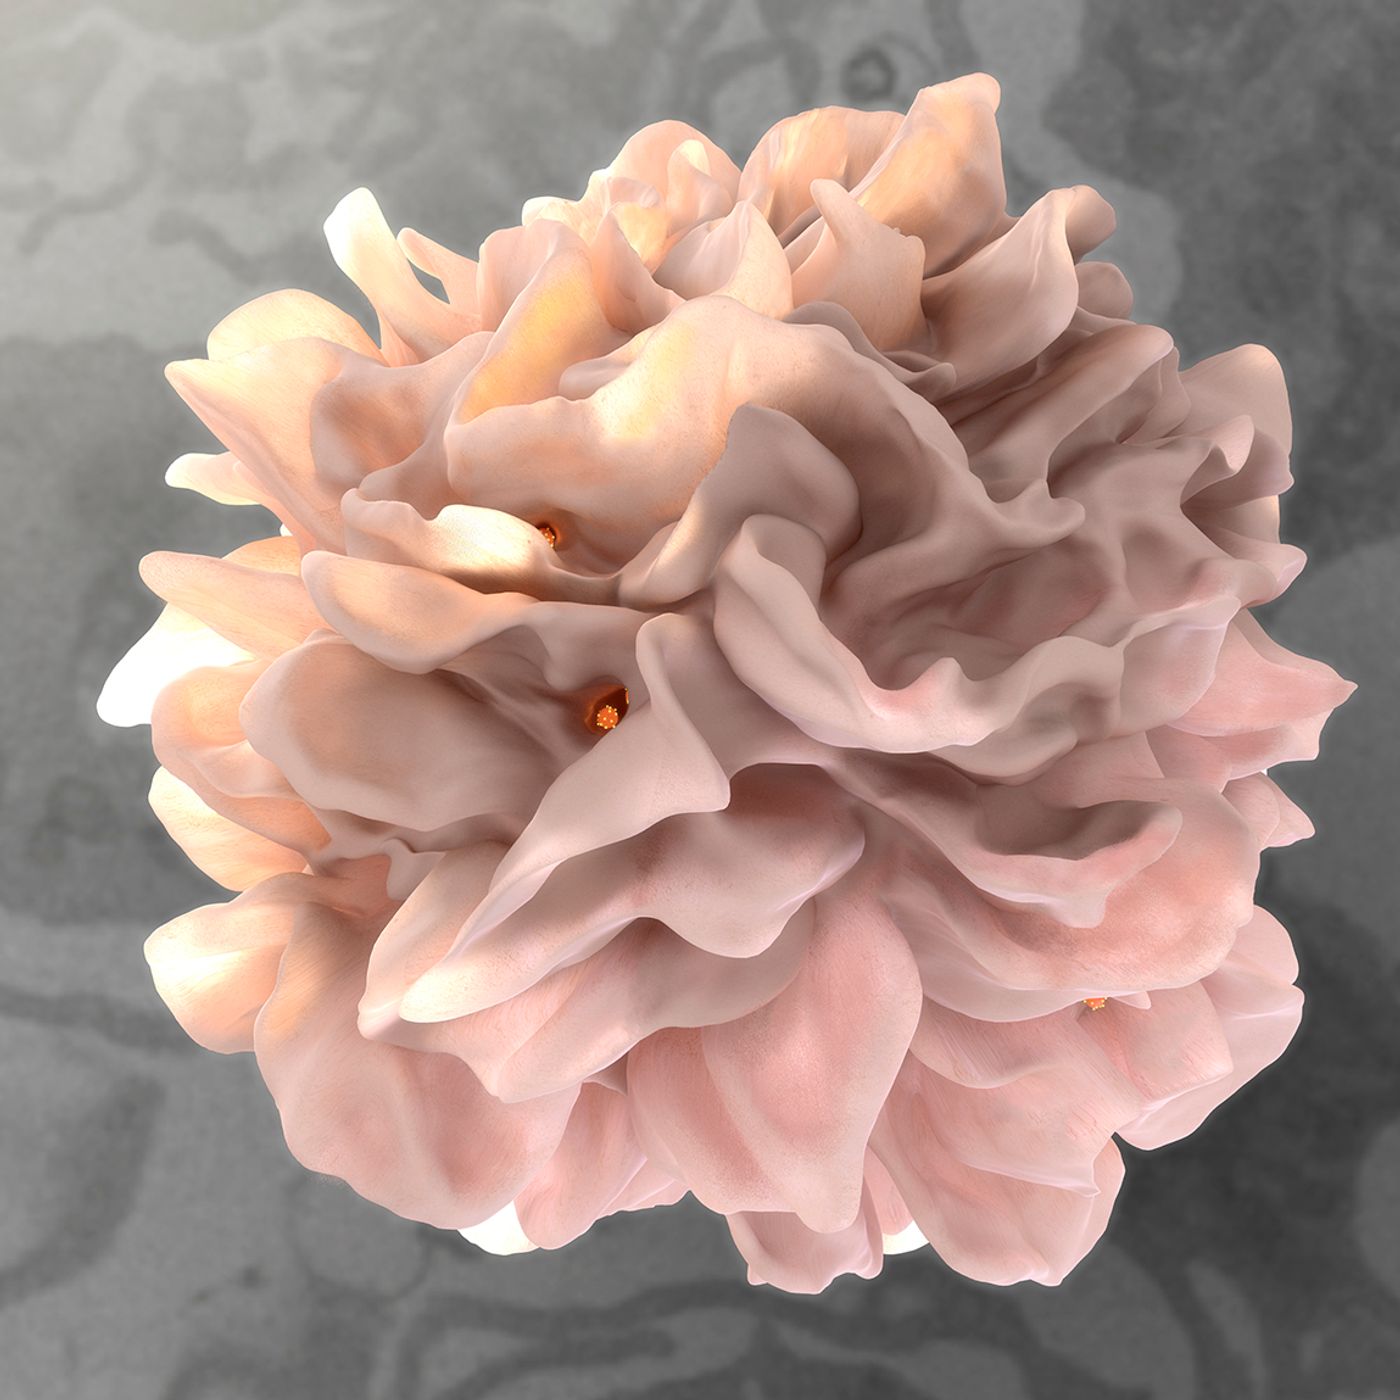 High-Resolution Electron Microscopy Image of a Dendritic Cell. Image credit: Donald Bliss, National Library of Medicine